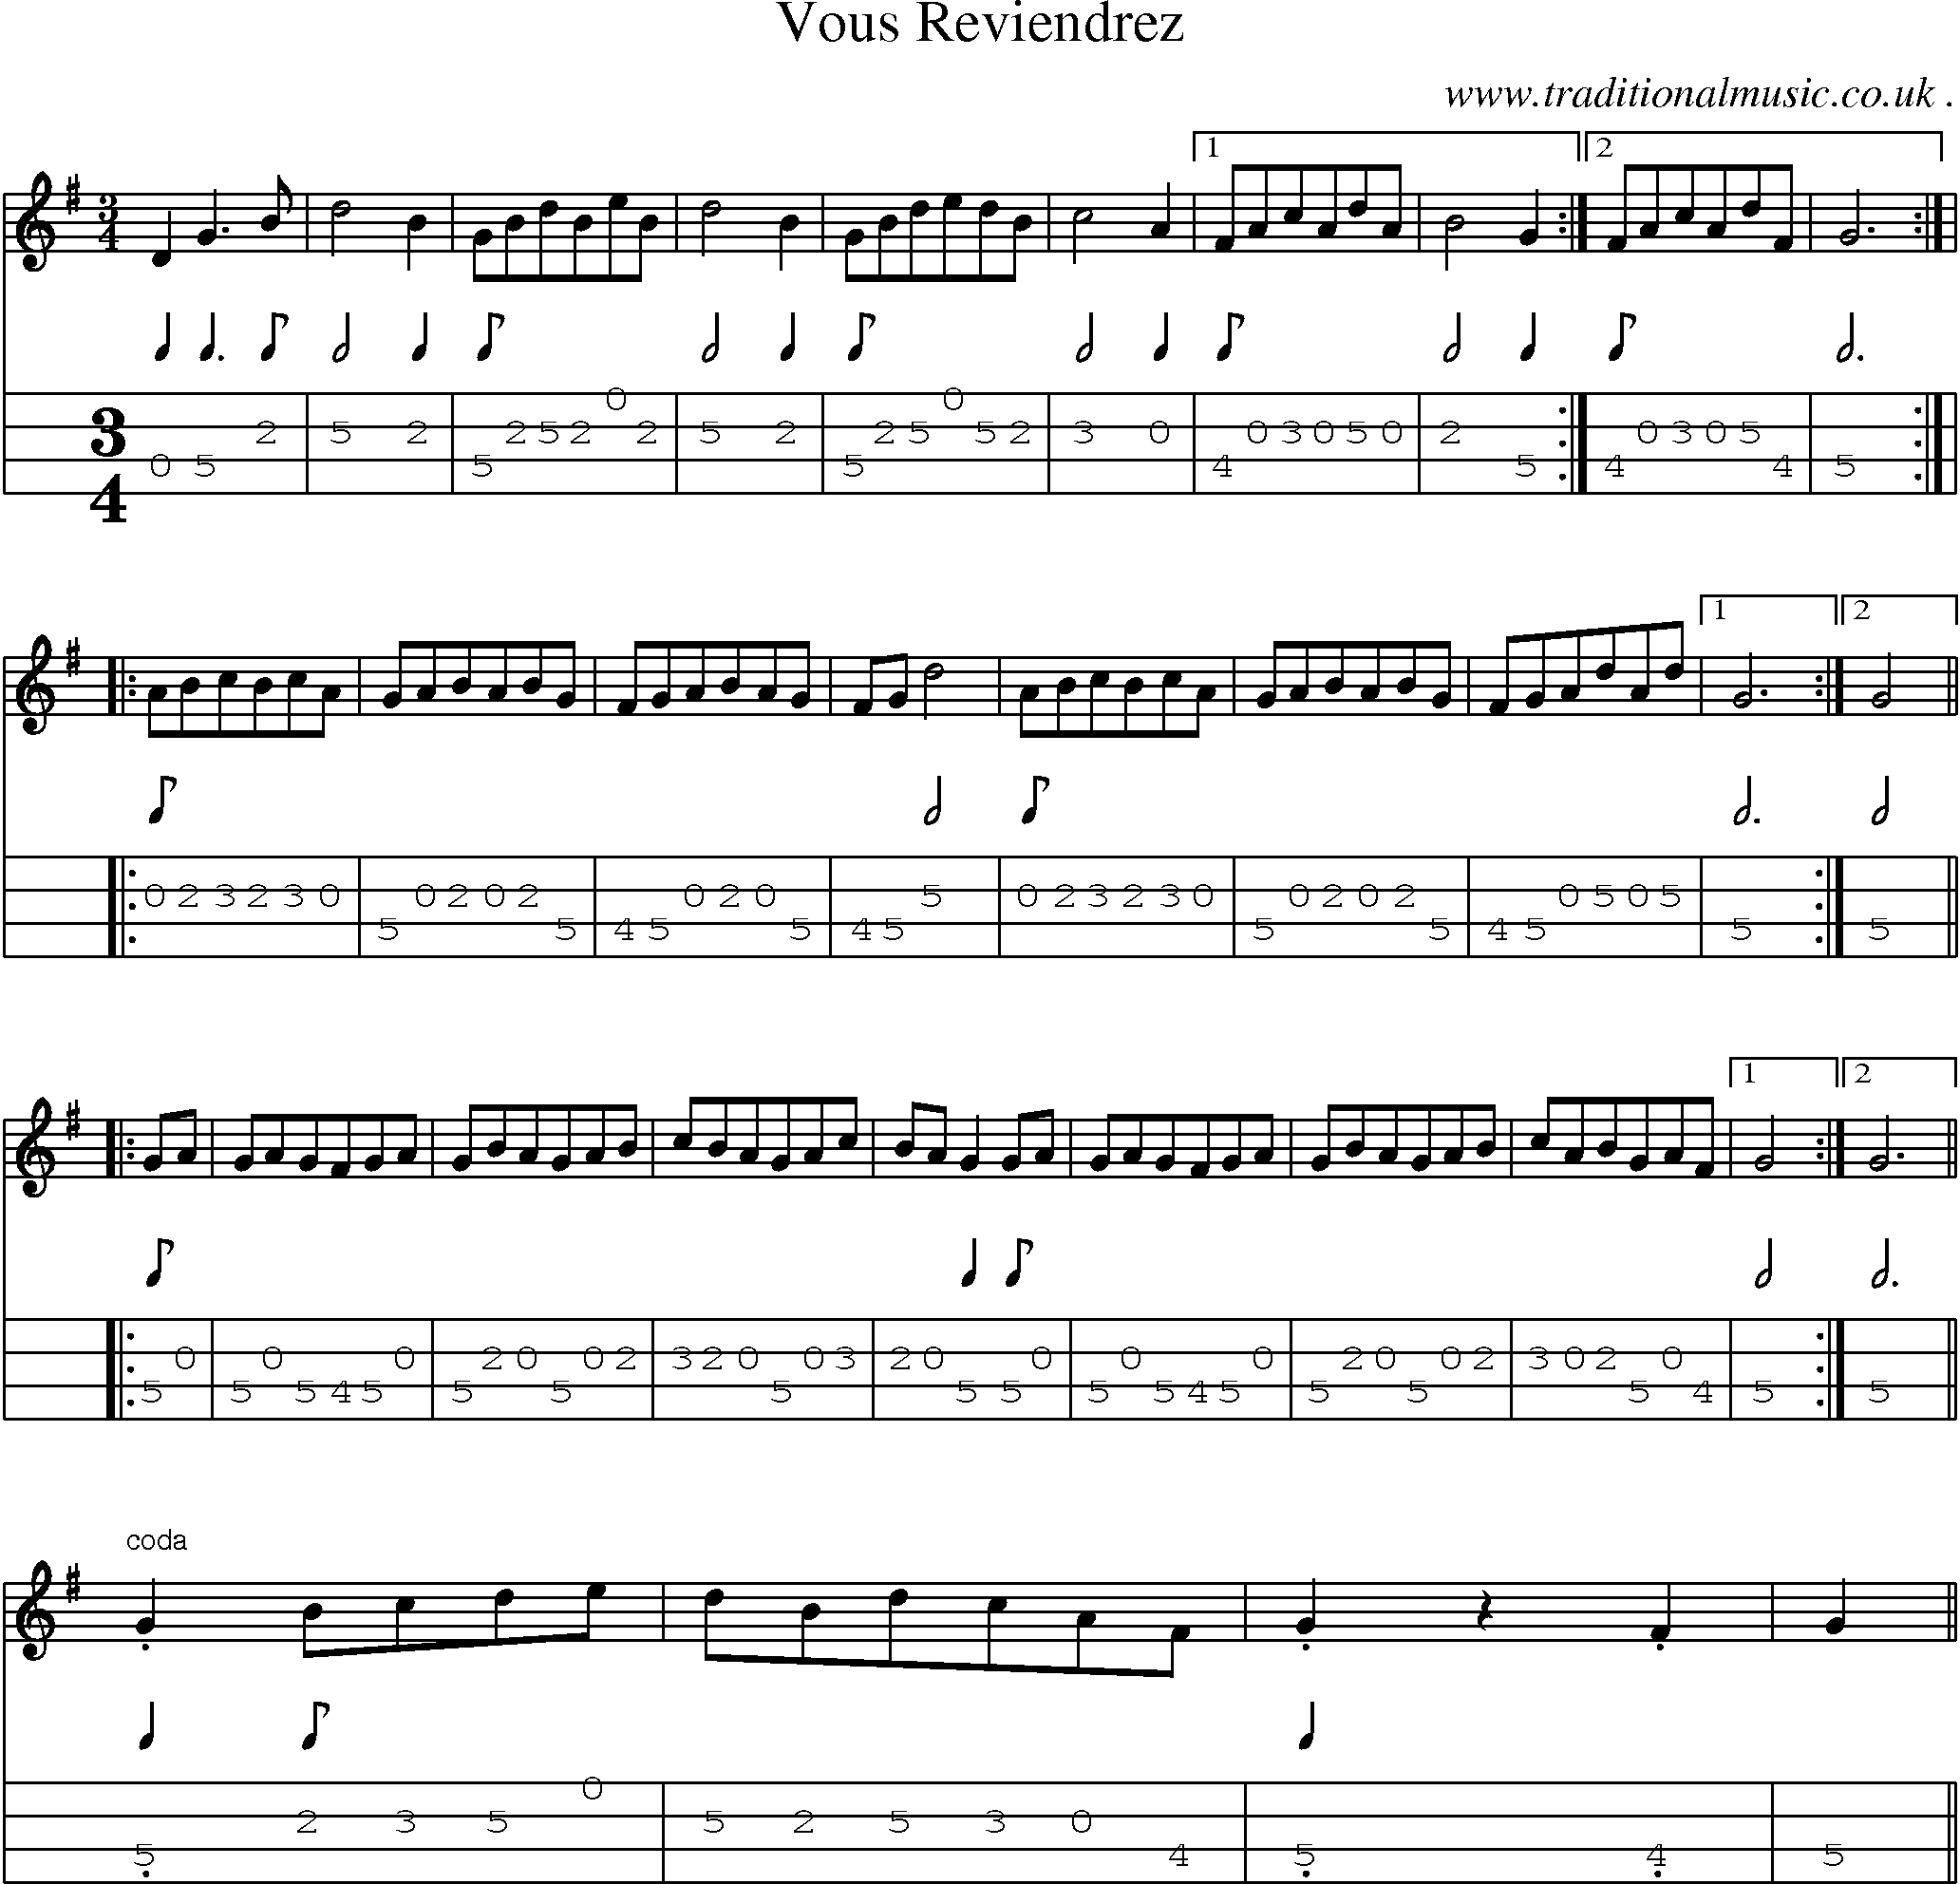 Sheet-Music and Mandolin Tabs for Vous Reviendrez